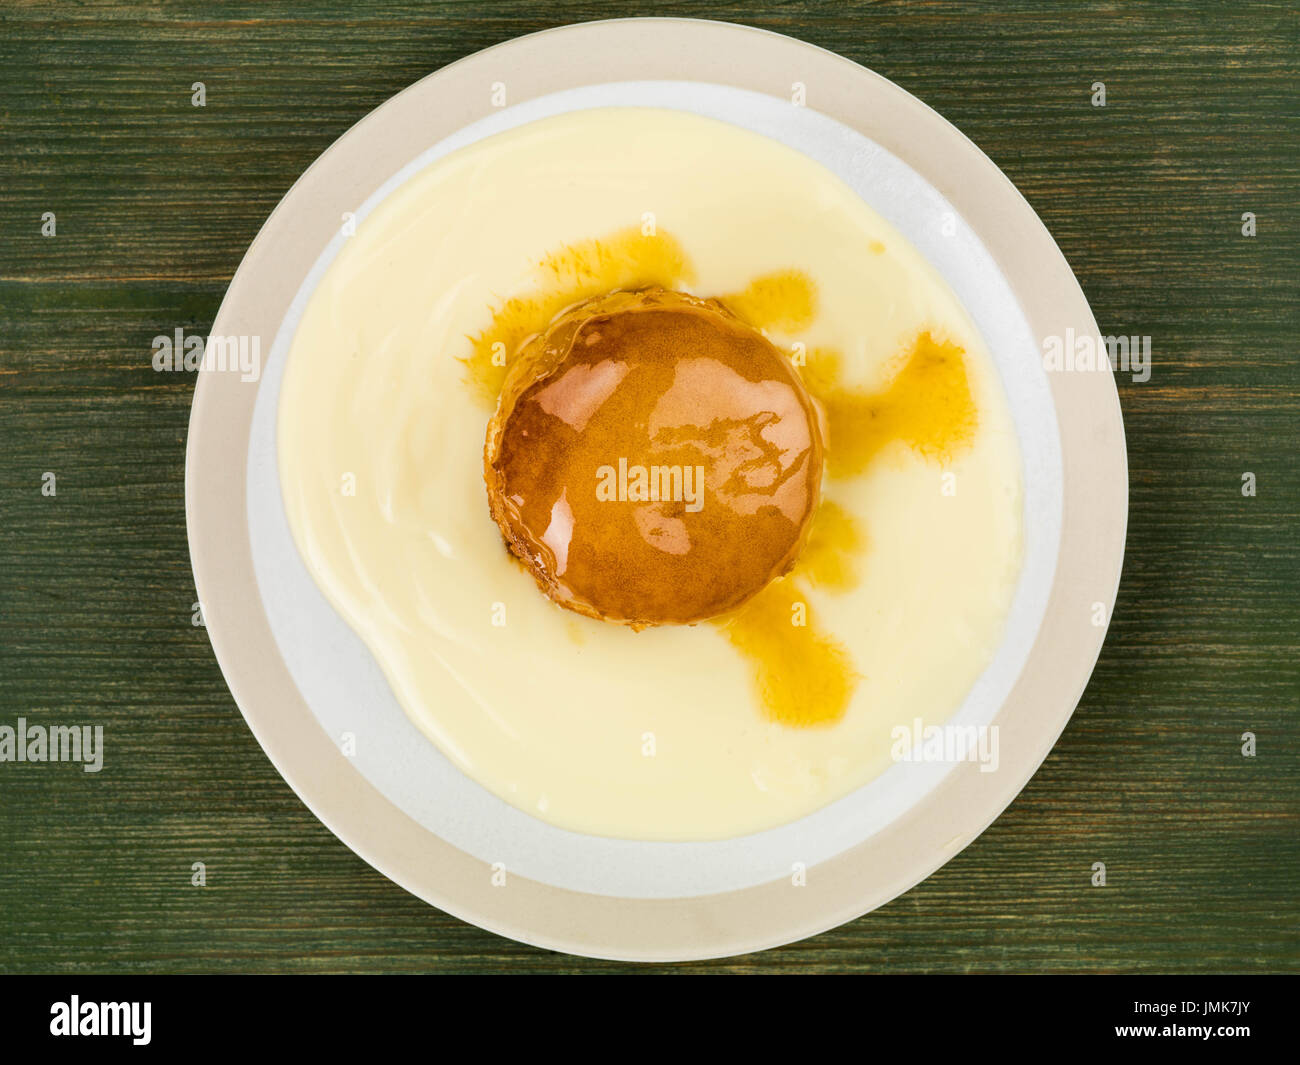 Syrup or Treacle Sponge Pudding With Custard Against a Green Wooden Background Stock Photo